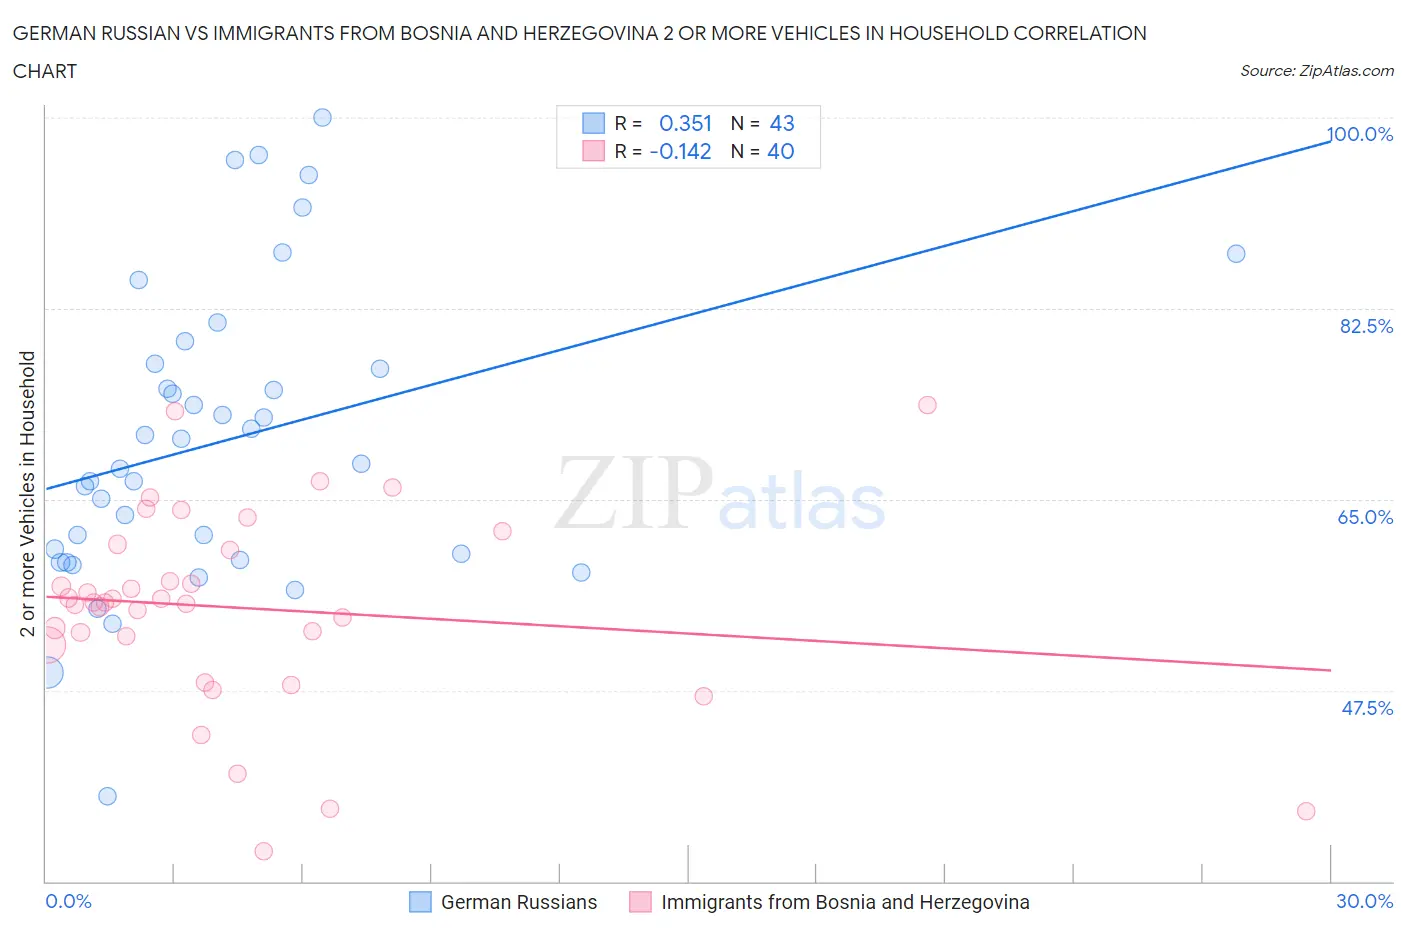 German Russian vs Immigrants from Bosnia and Herzegovina 2 or more Vehicles in Household